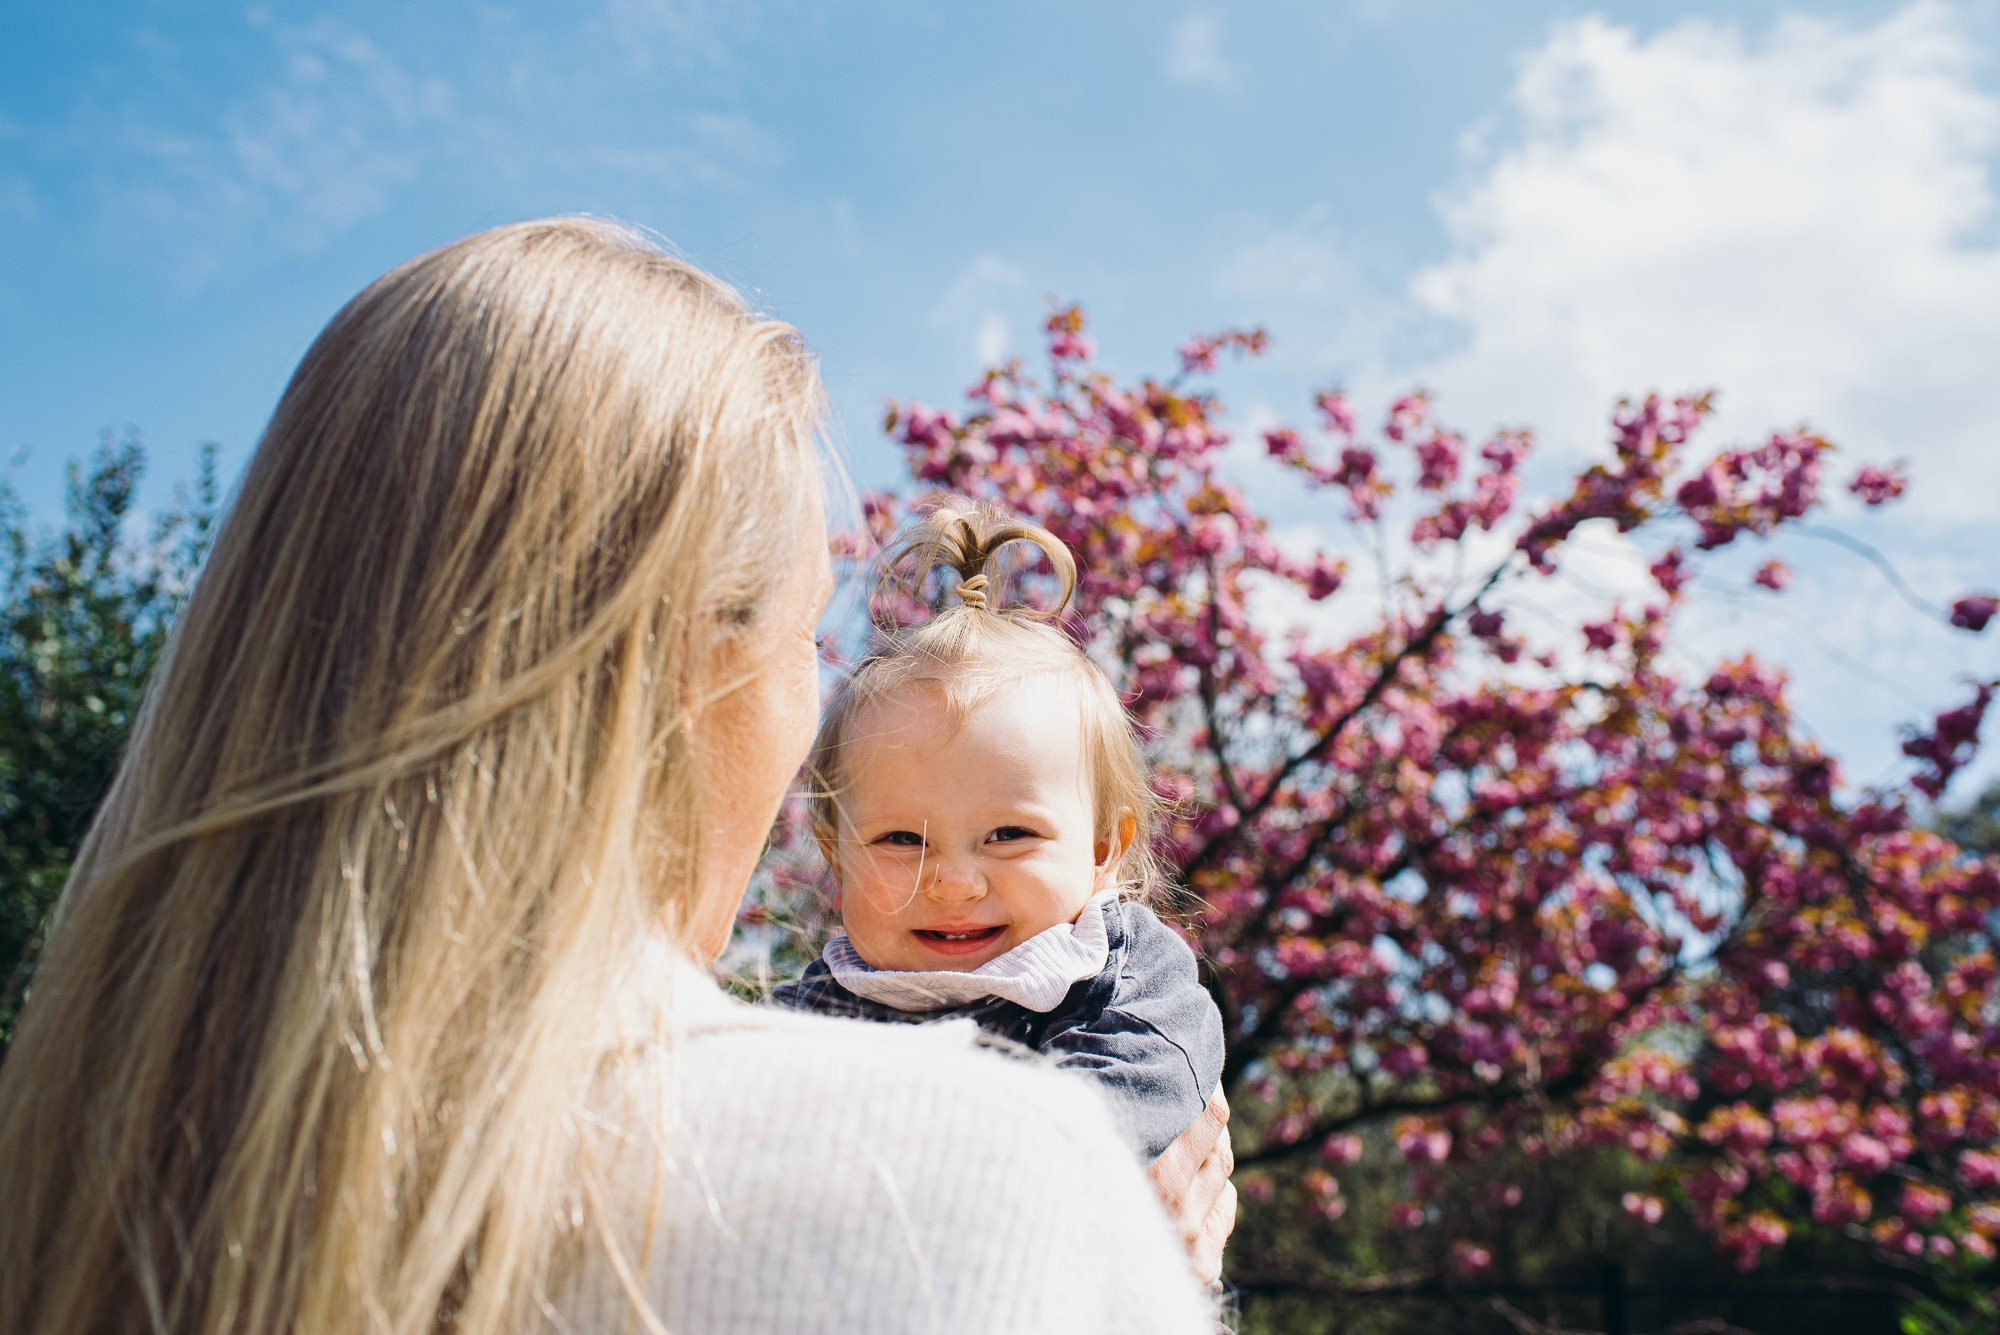 mother-daughter-natural-portrait-blossom-background-smiling-dulwich-family-photographer.jpg